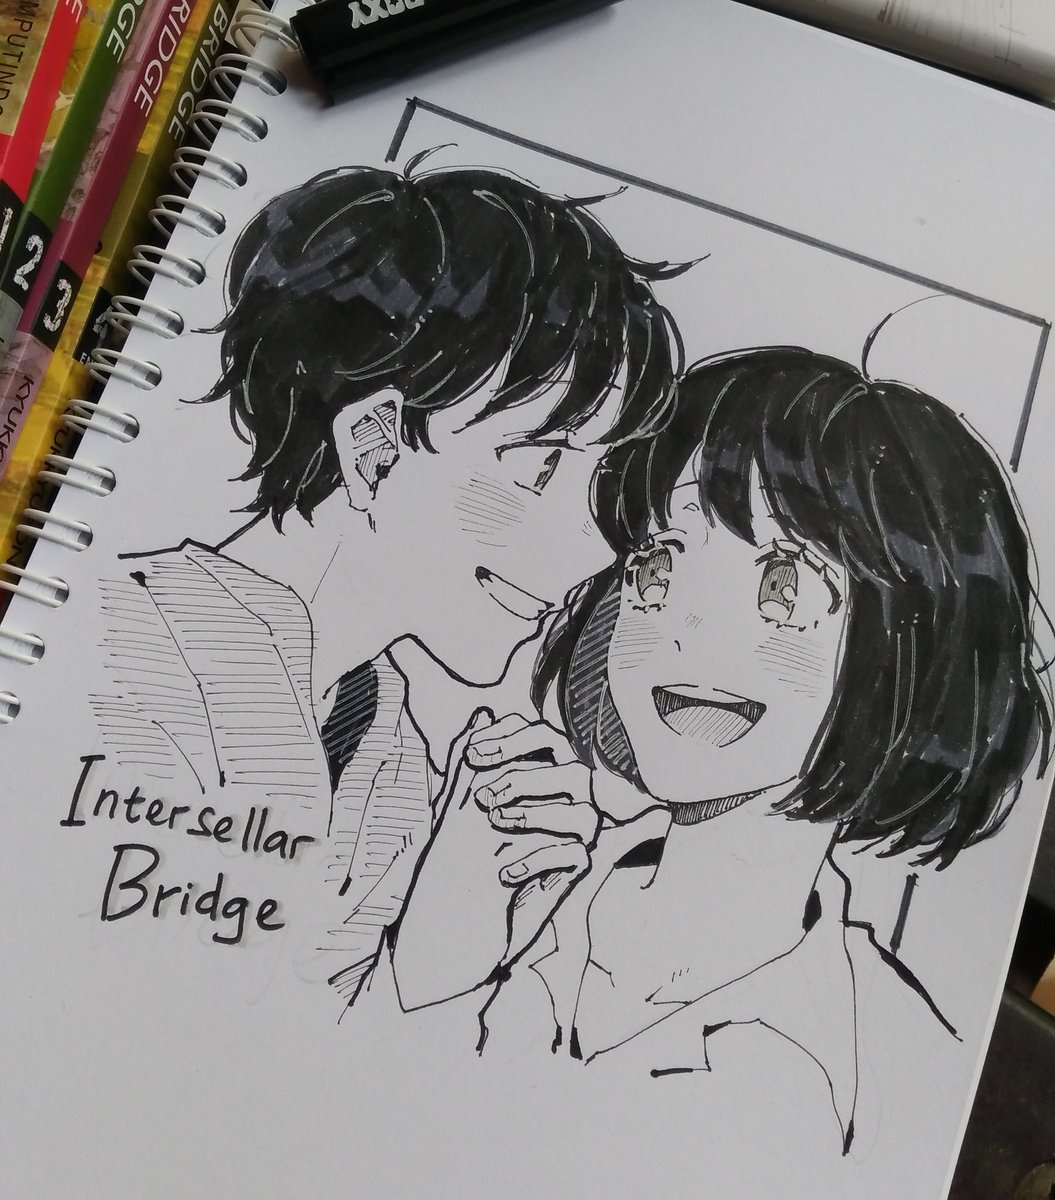 Just finished reading Intersellar Bridge by @kyukkyupon !! I really love history and this manga is really amazing ?
Haru and Xing are such precious kids ♡
#きゅっきゅぽん
#星間ブリッジ 